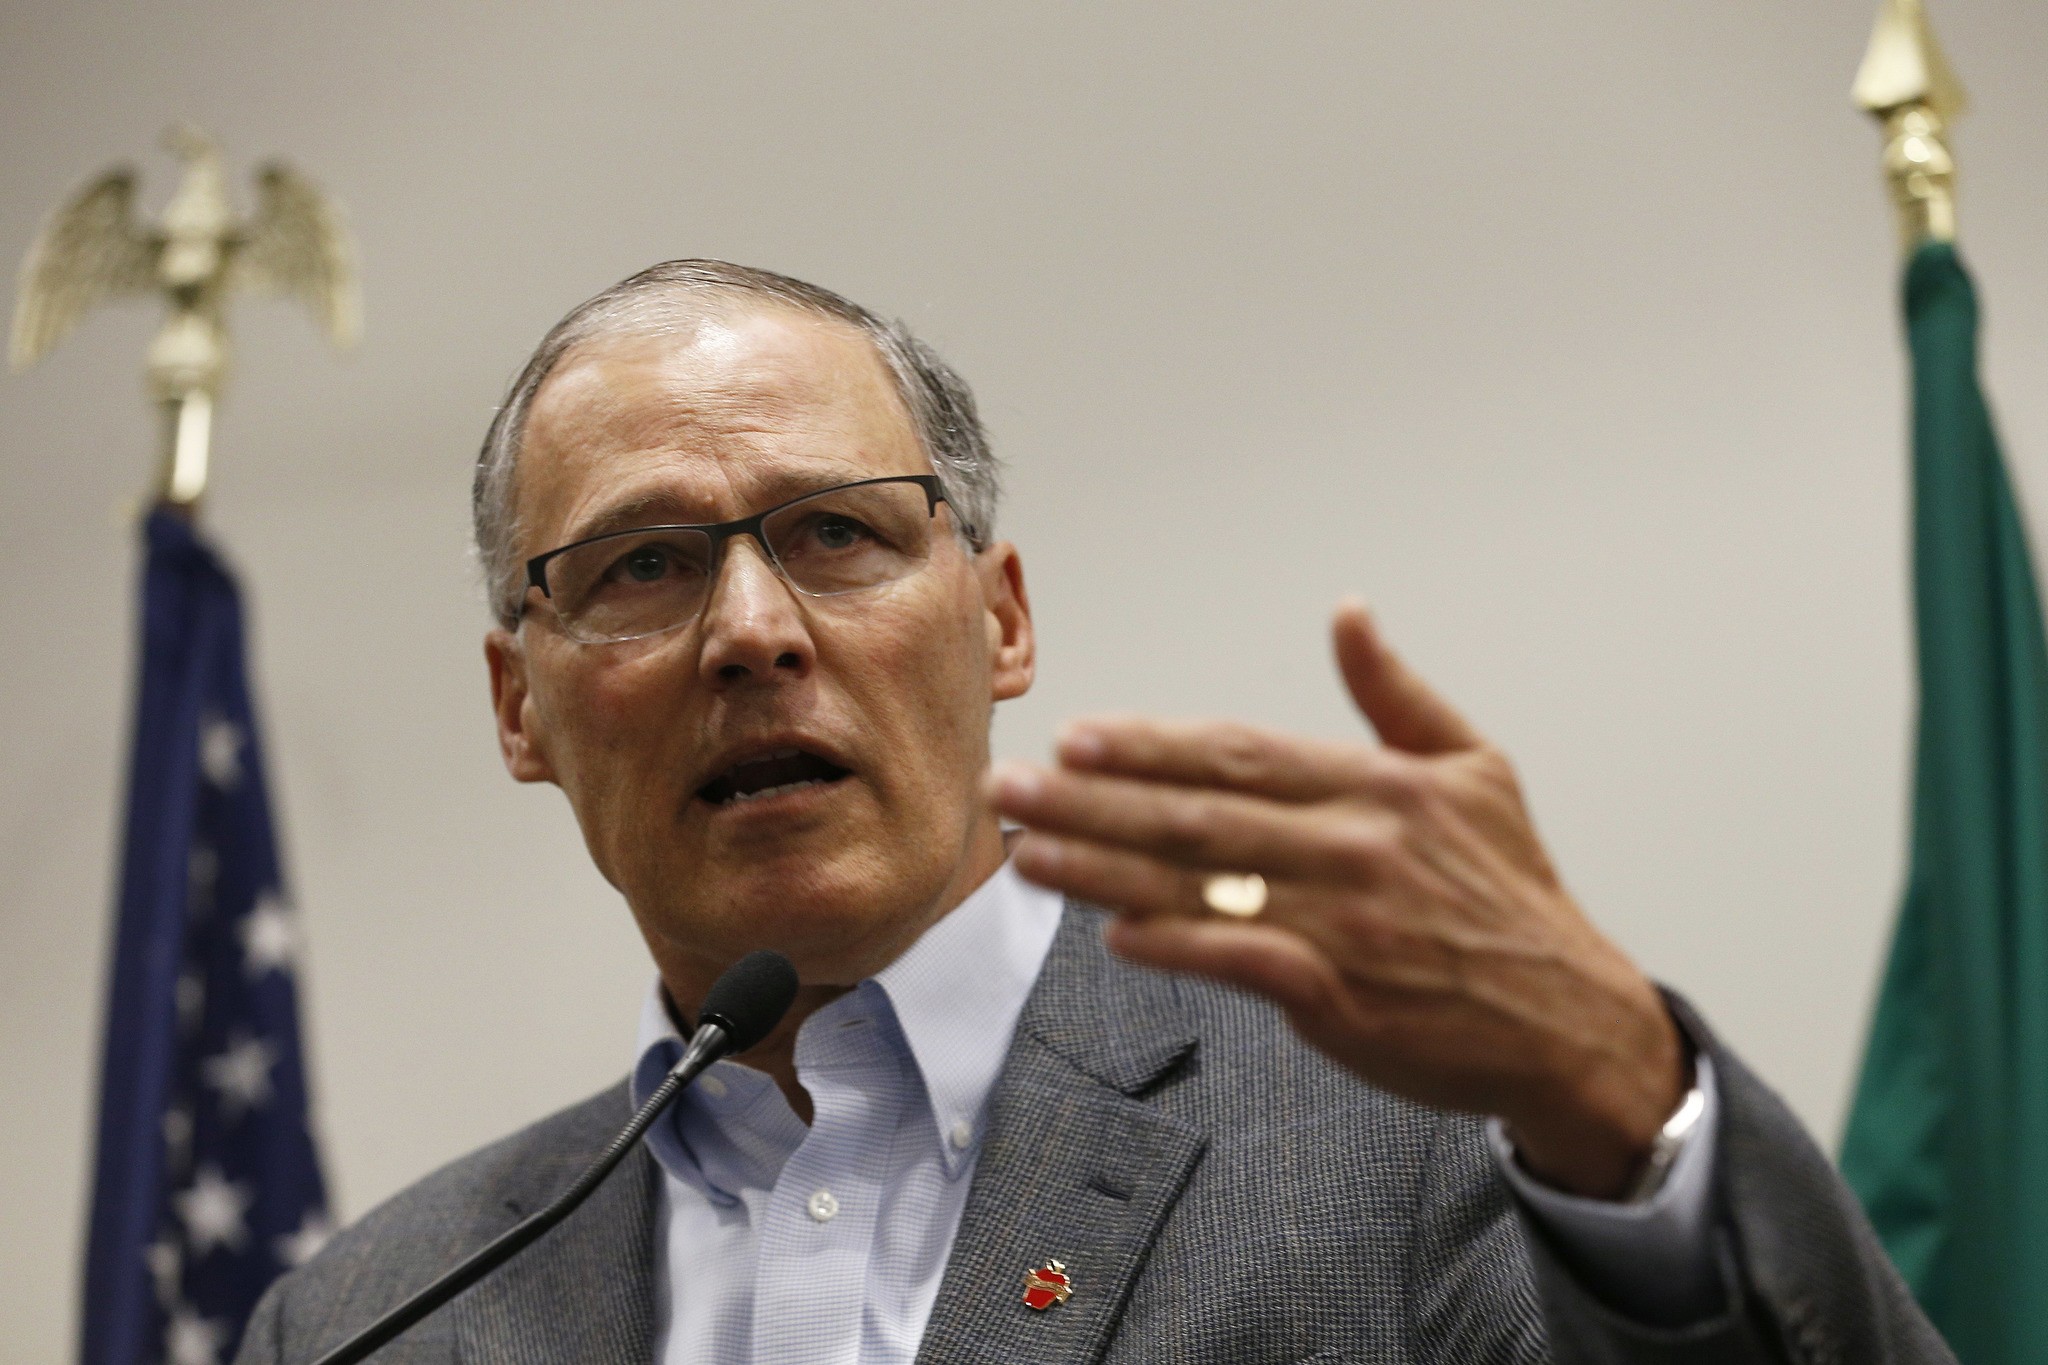 Gov. Jay Inslee speaks to the media in the Airport Office Building at Seattle-Tacoma International Airport on Saturday. (Logan Riely/The Seattle Times via AP)